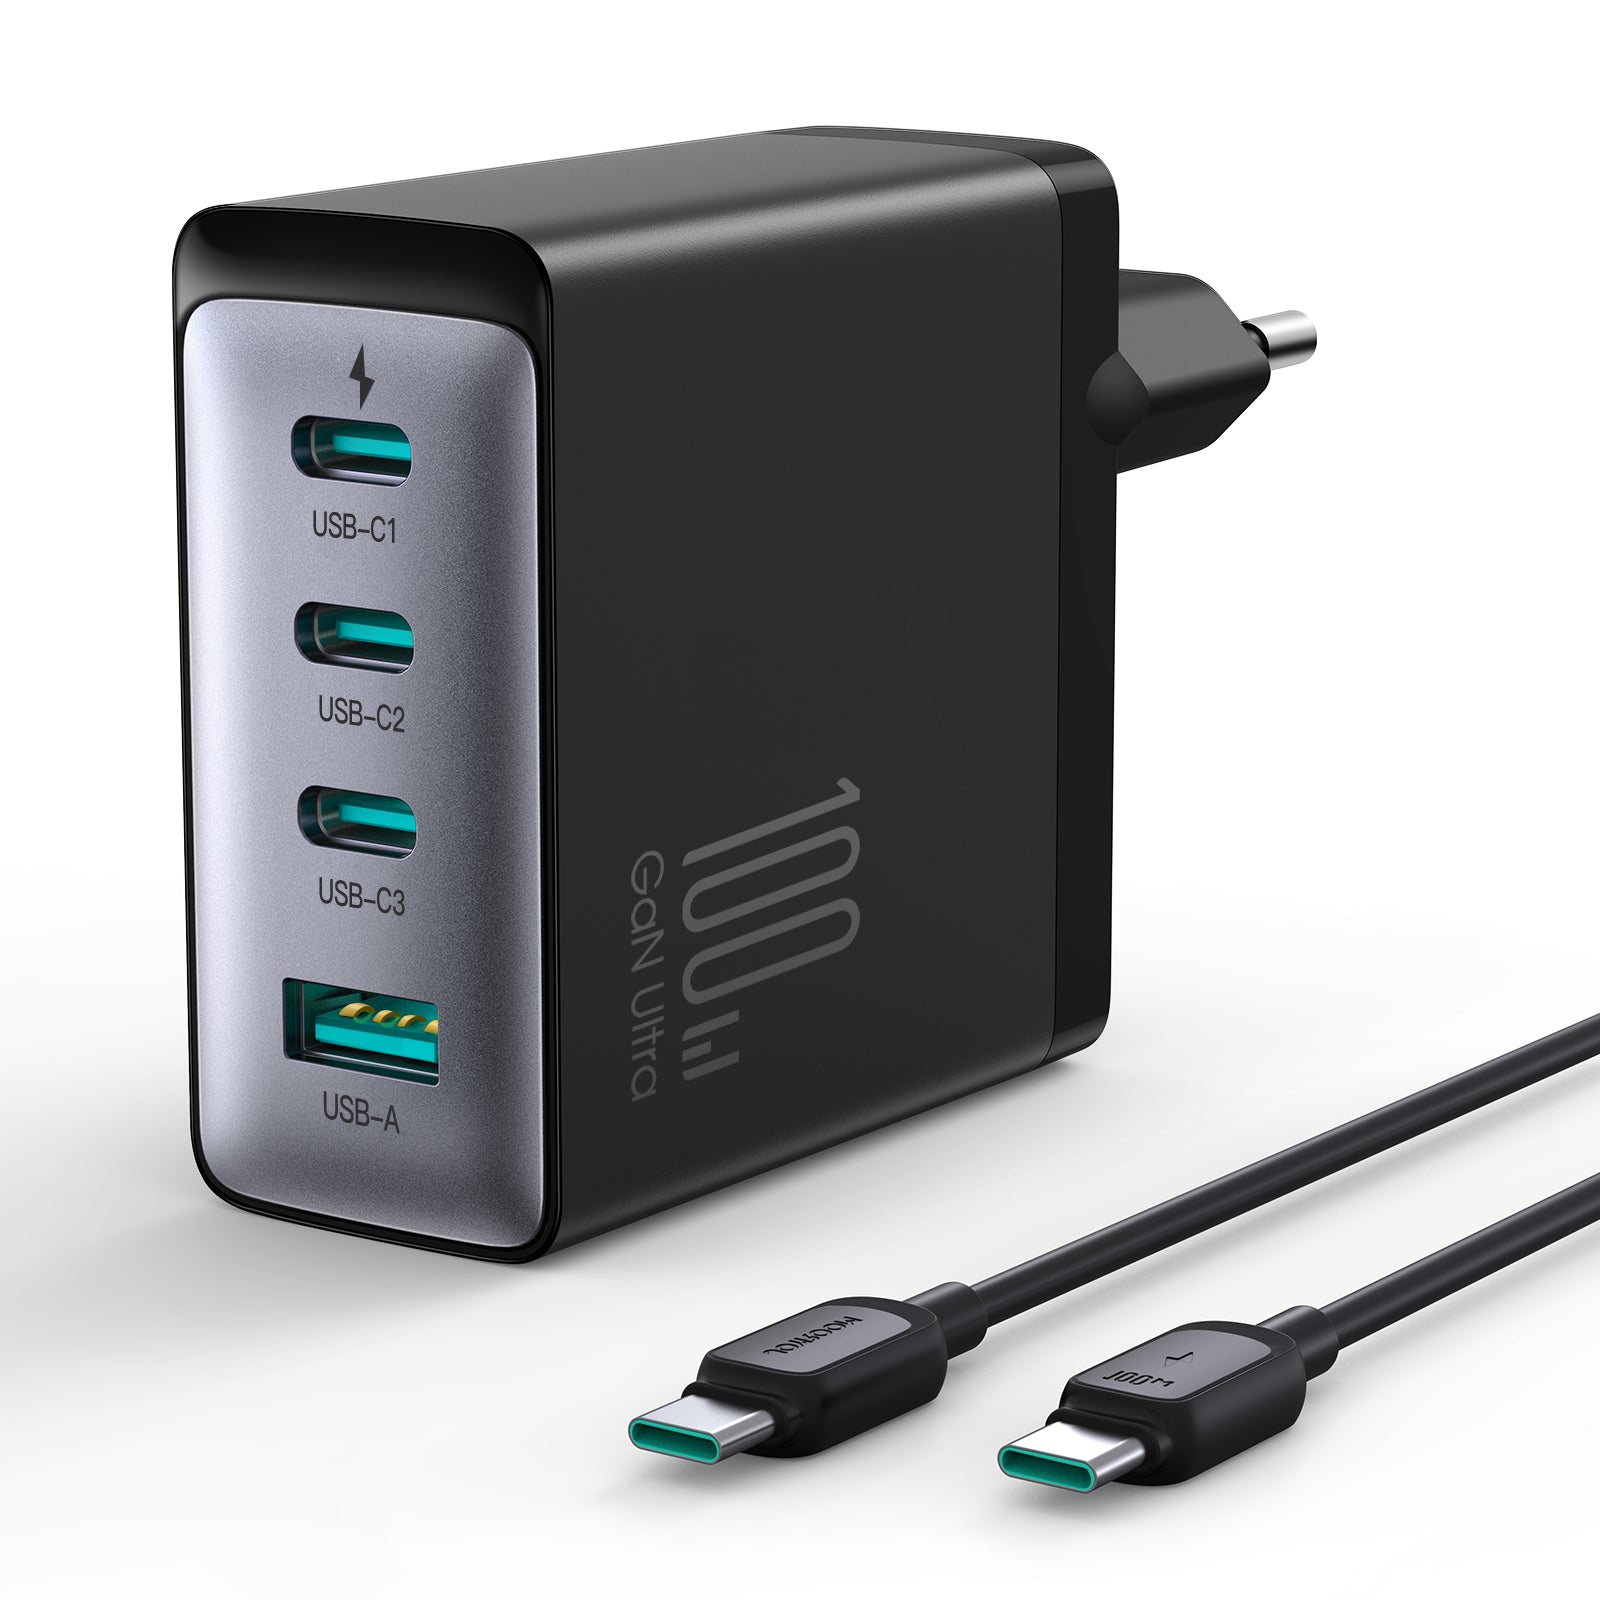 T9 3-Port PD 65W GaN Fast Charger - Charge Wireless, Live Boundless